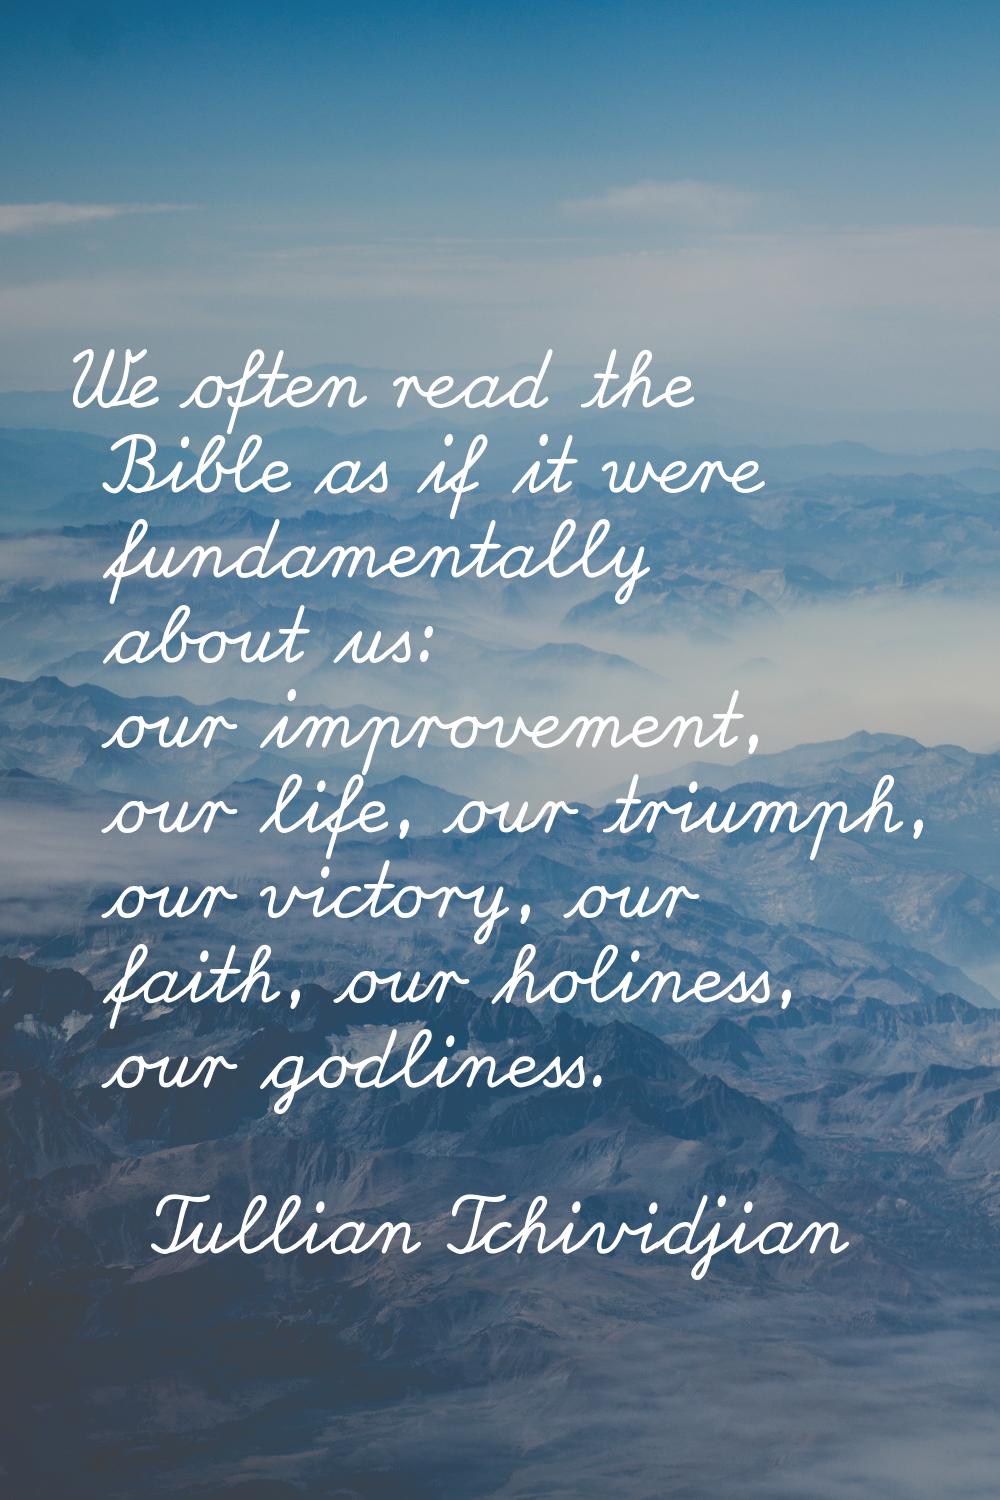 We often read the Bible as if it were fundamentally about us: our improvement, our life, our triump